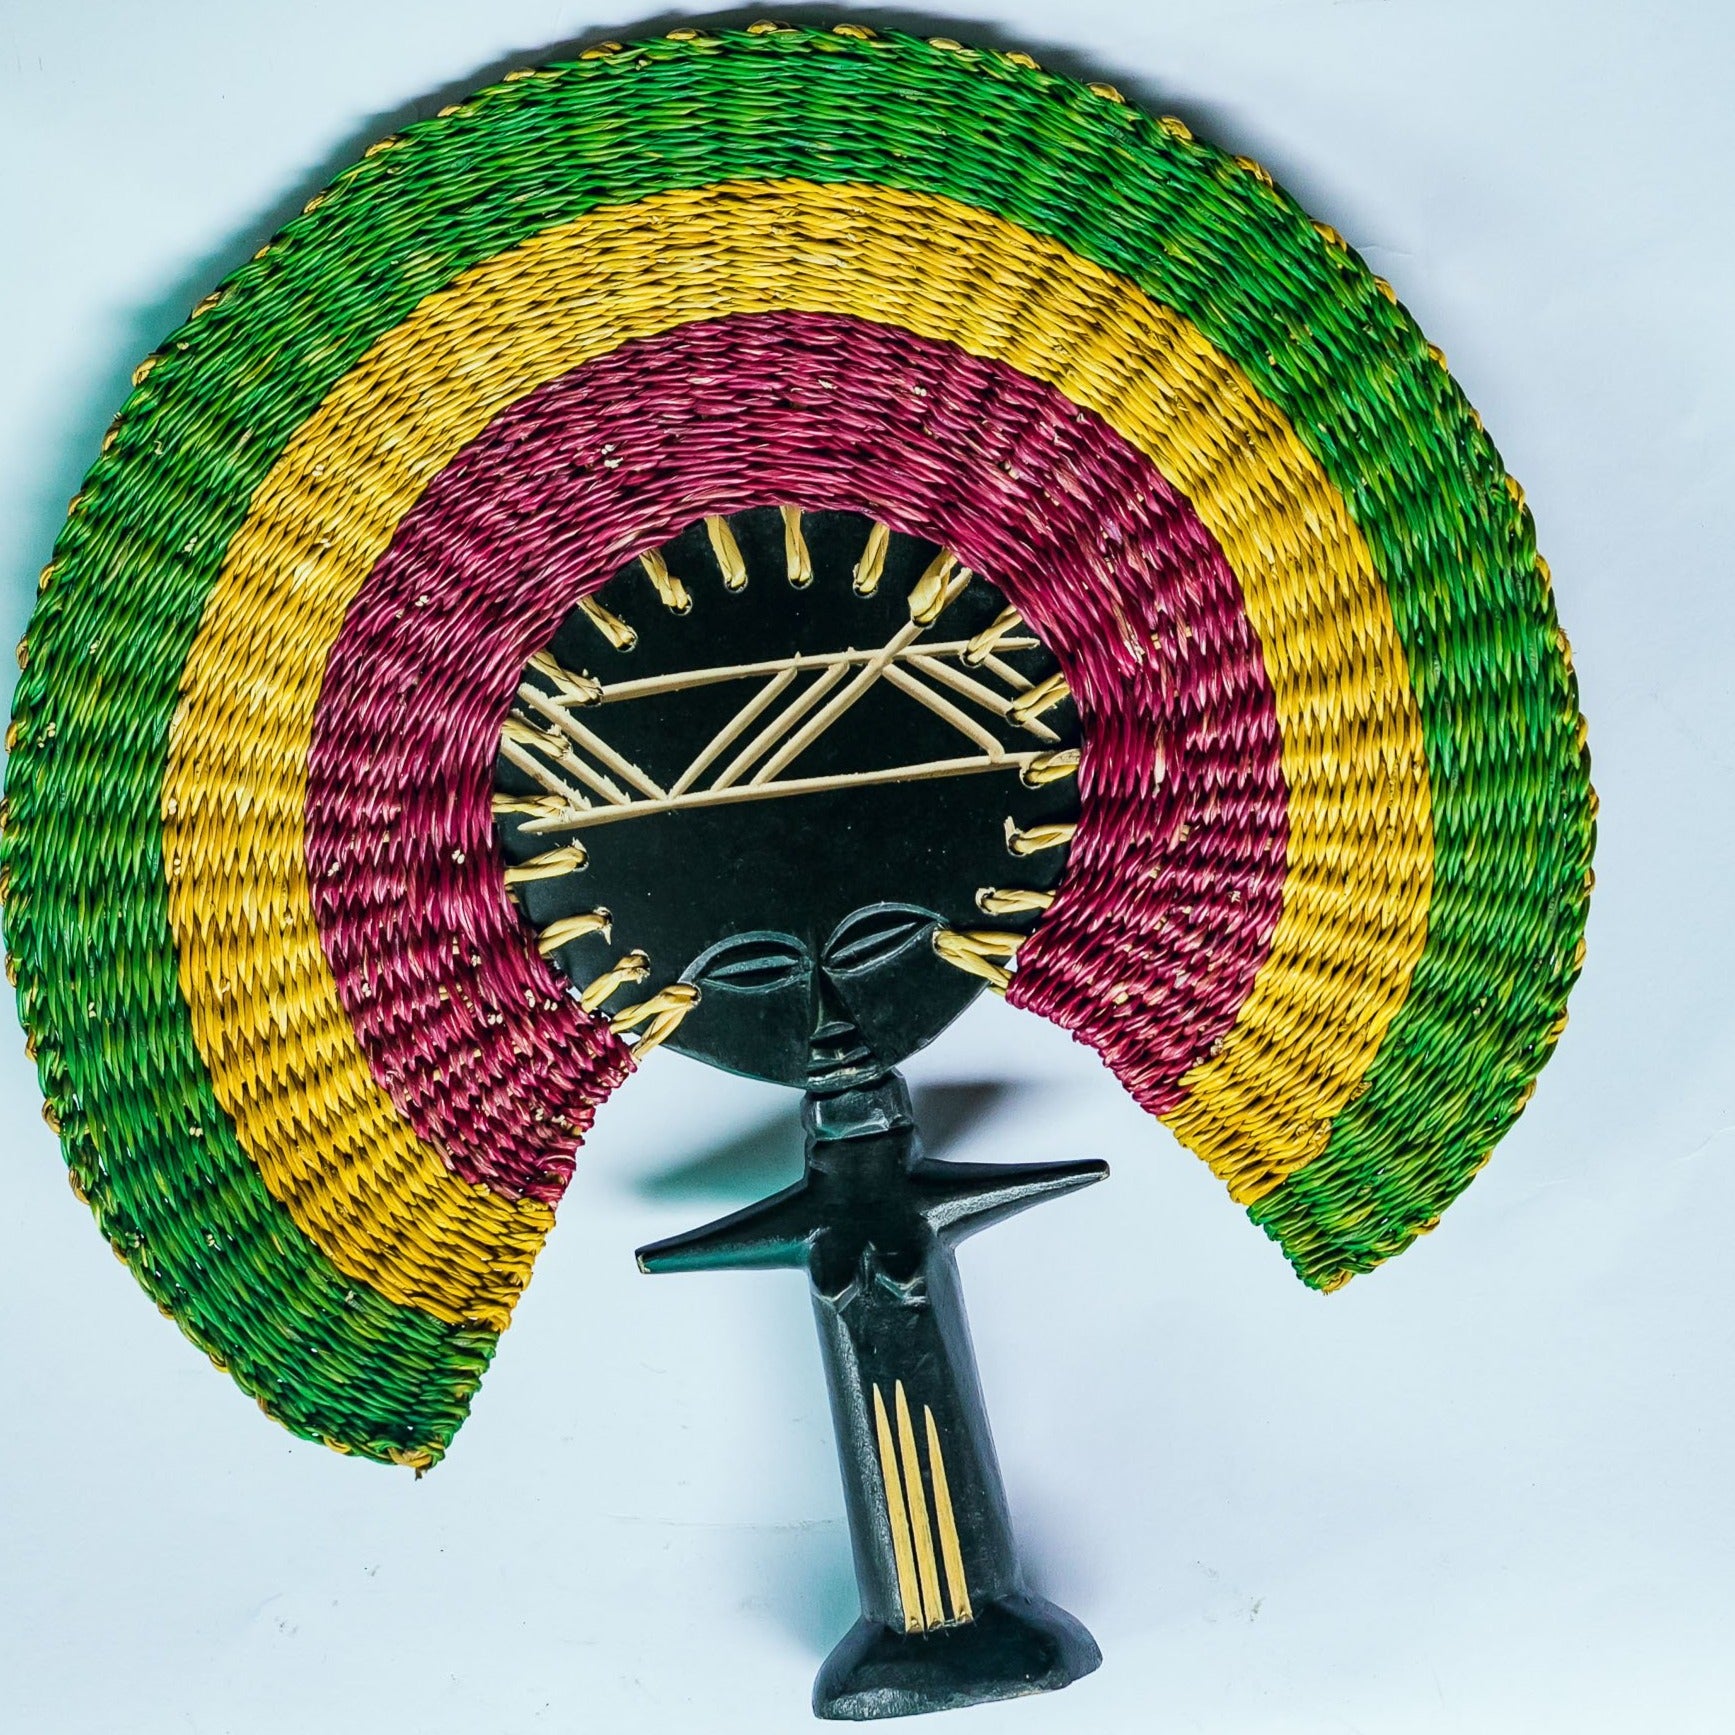 Fan with fertility Goddess, hand-made of straw, Ghana, West Africa